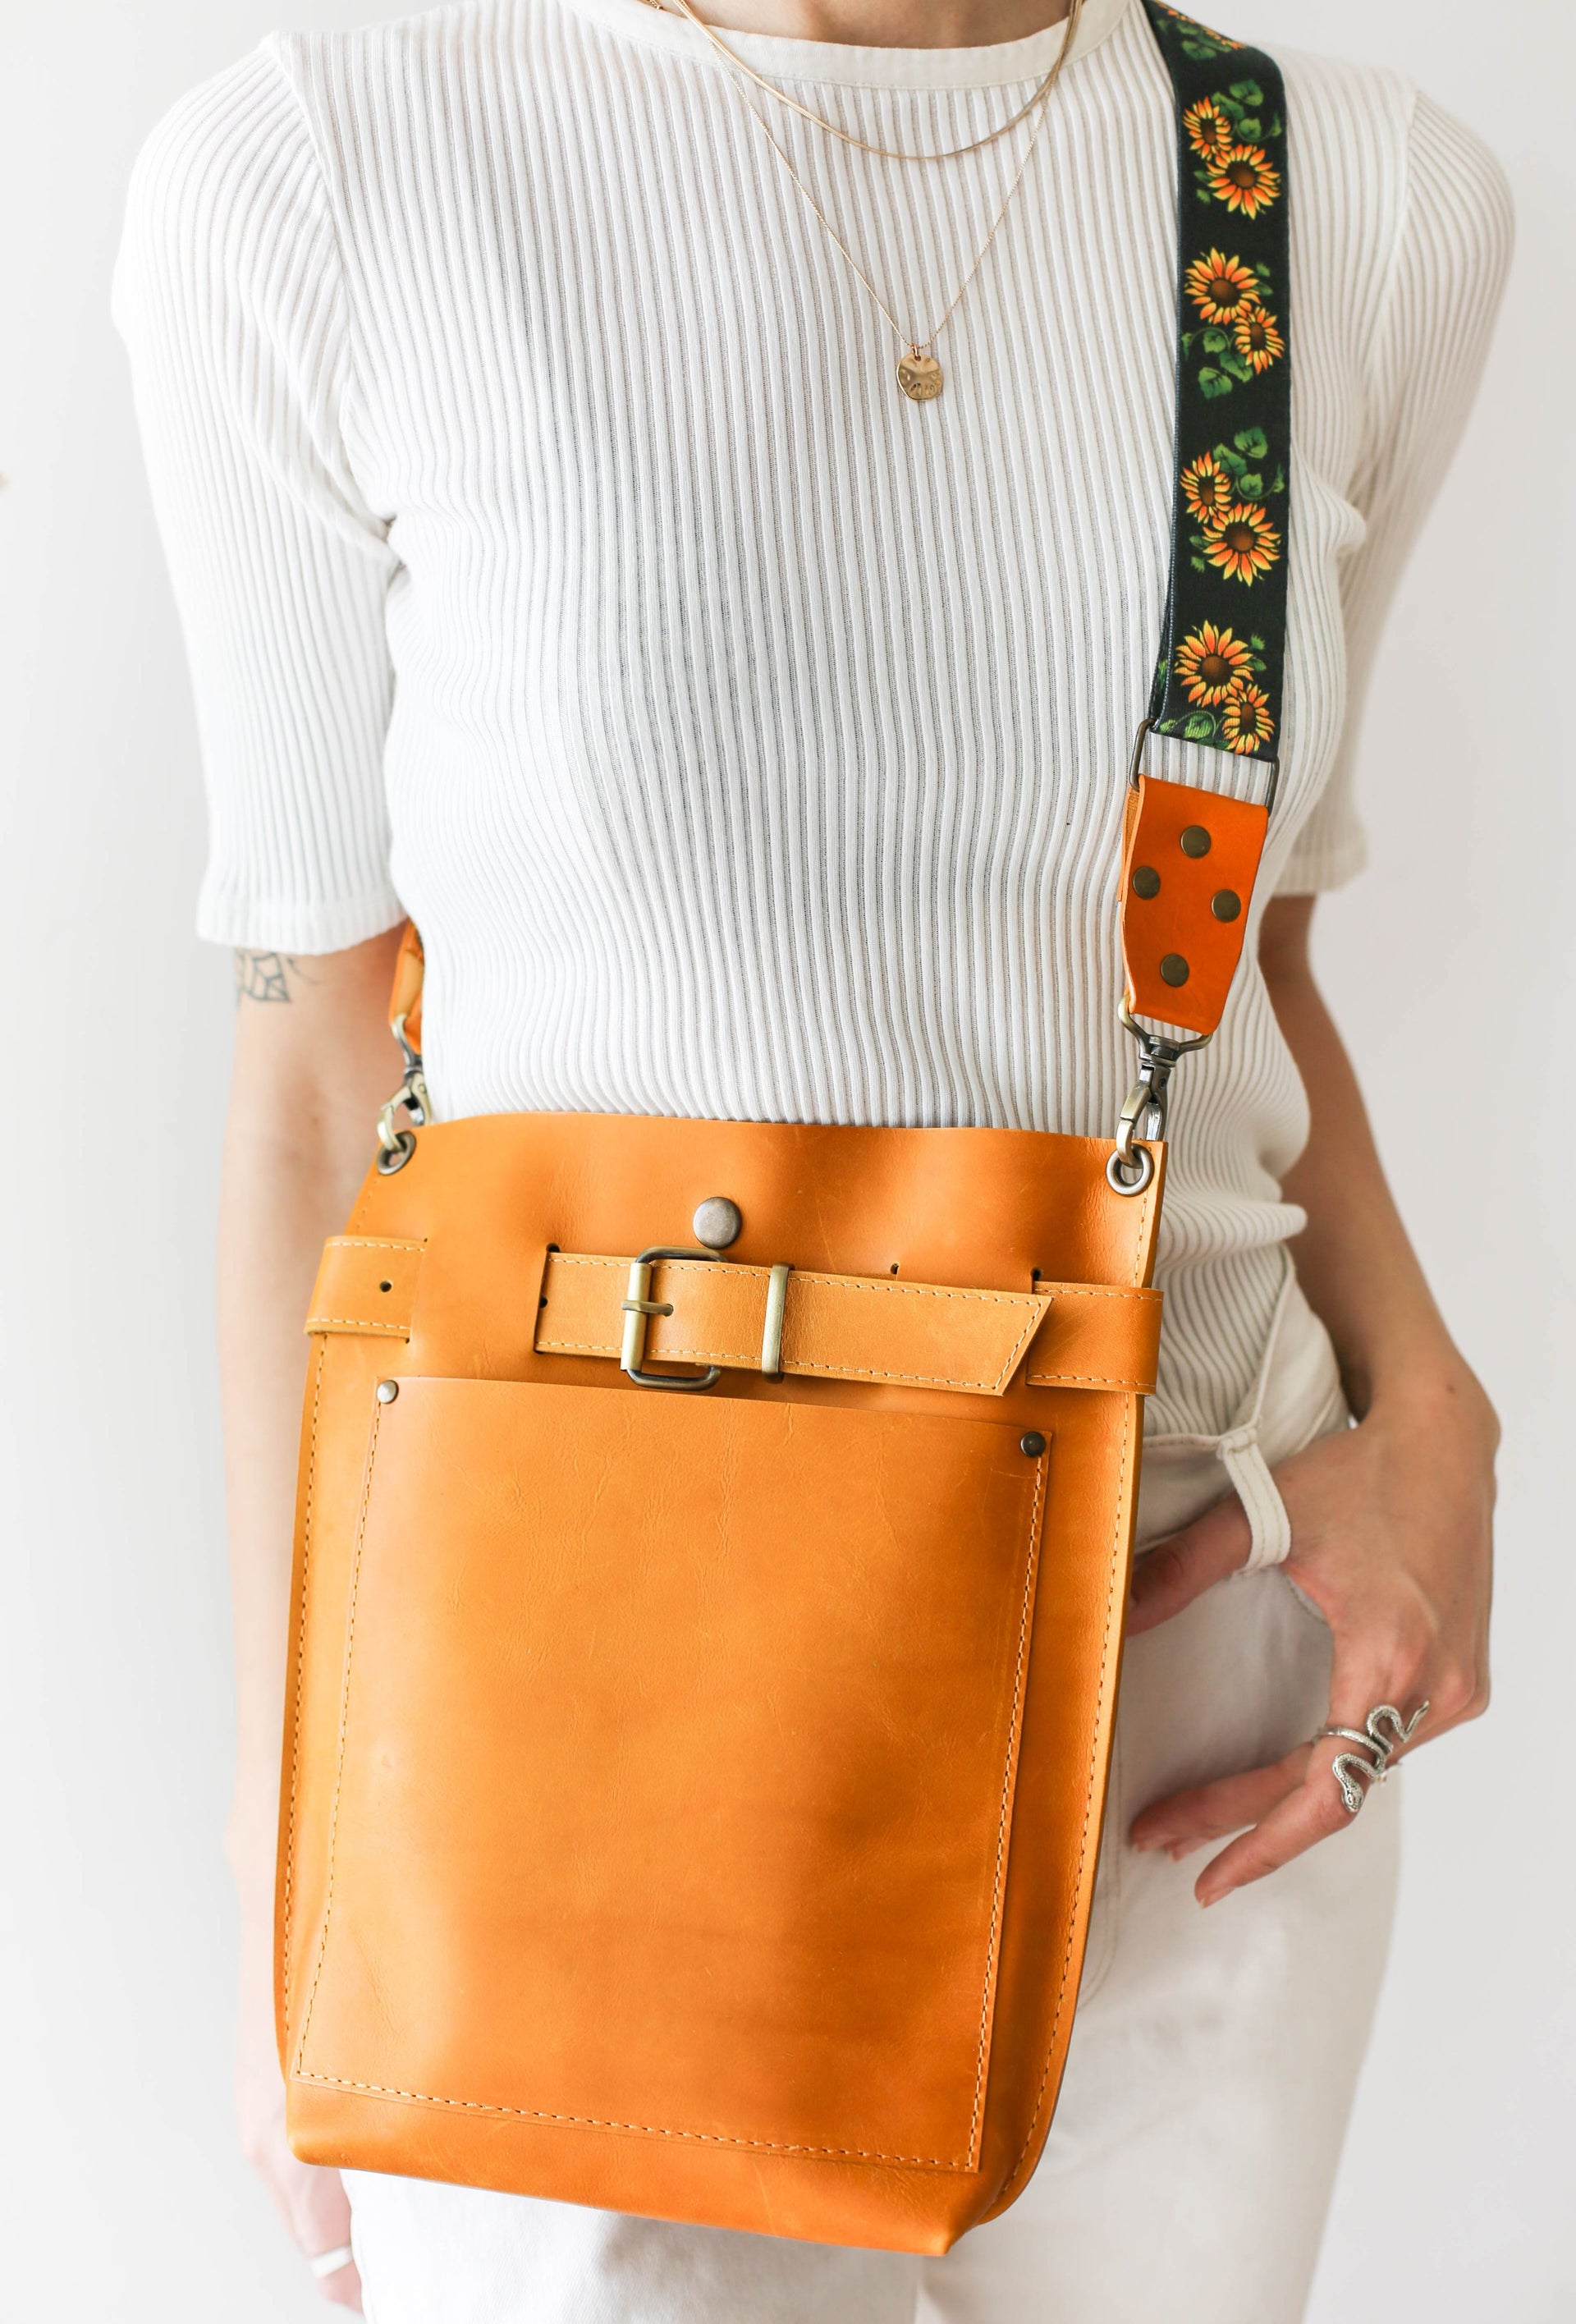 Yellow Leather Purse 